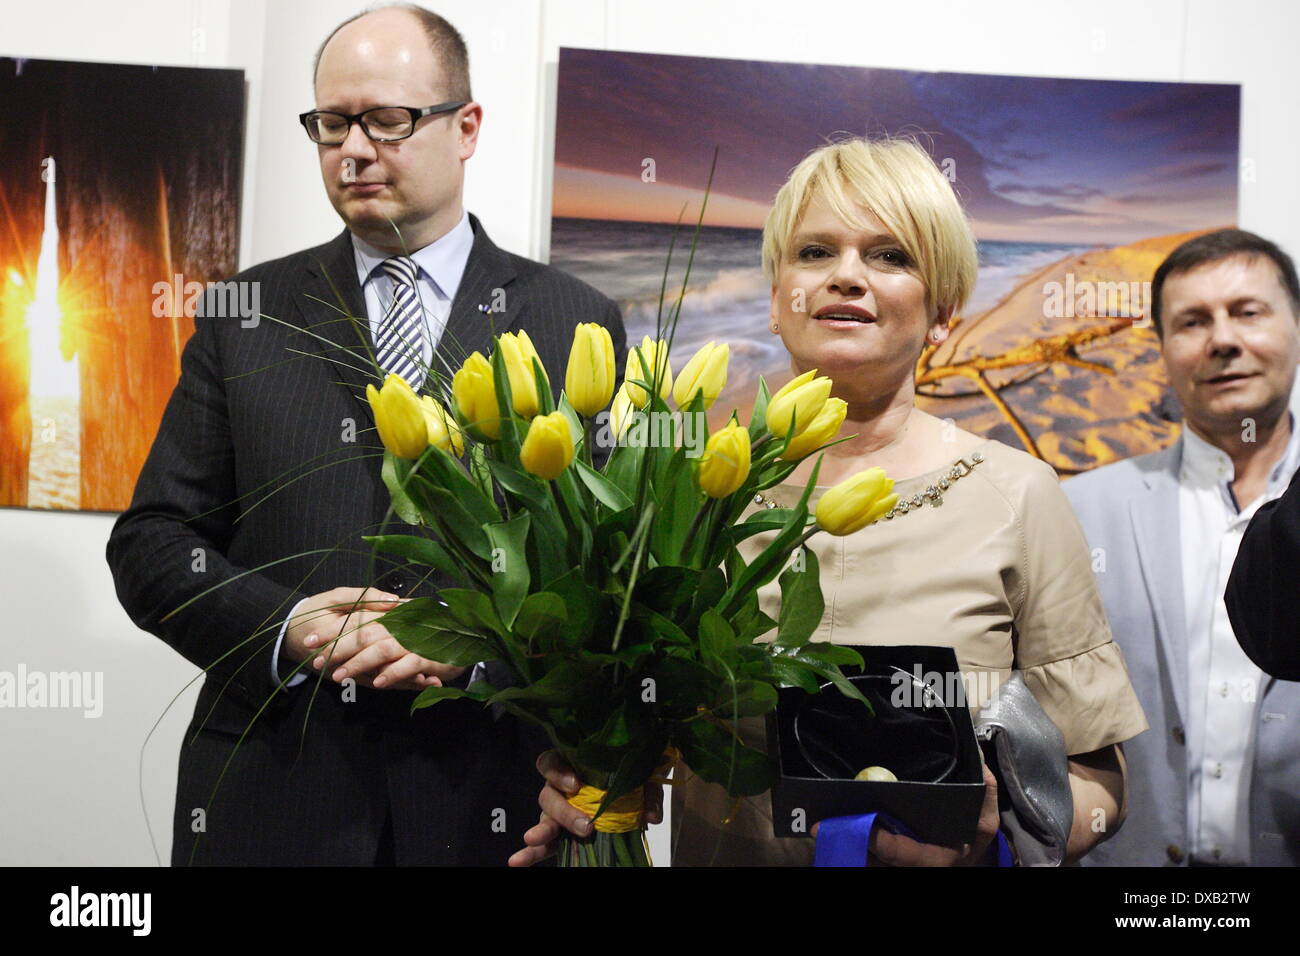 Gdansk, Poland 22nd, March 2014 Polish famous actress Katarzyna Figura (c) birthday celebrated in Gdansk. During the celebrations Figura opened her photography exhibition named 'Momenty' (Moments) presenting the dawning sea pictures. Stock Photo